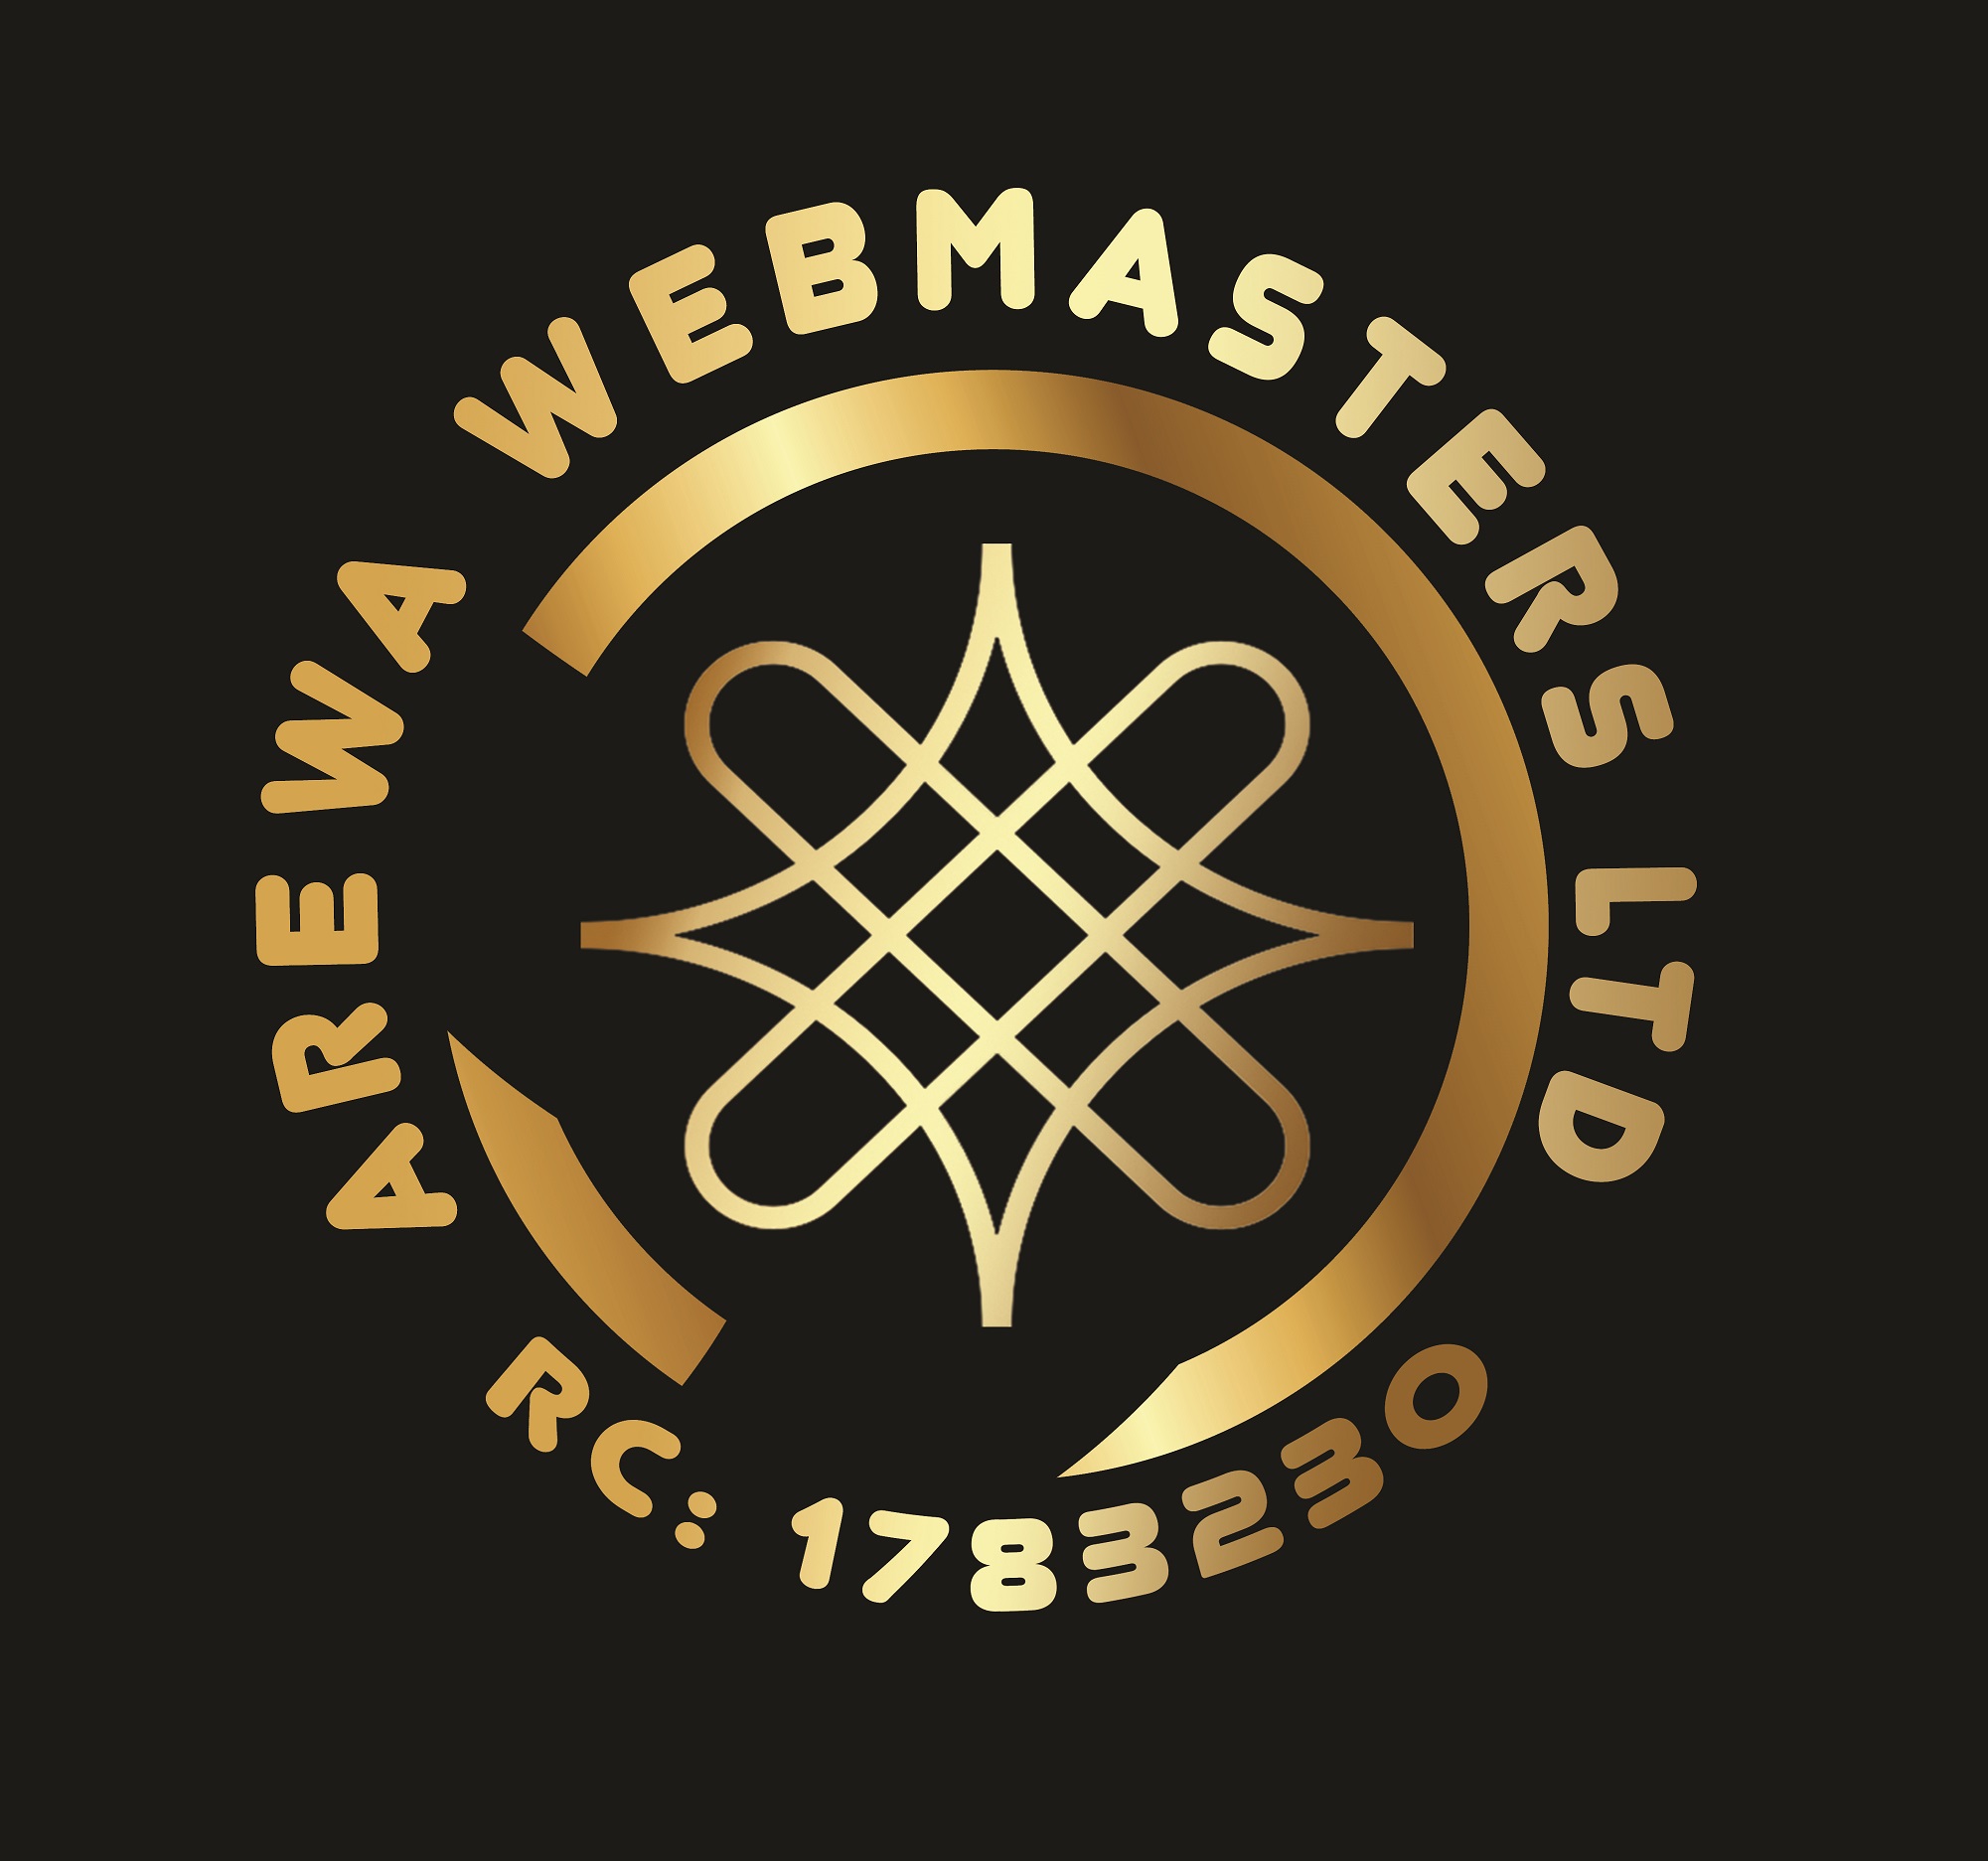 Pay arewawebmasterslimited on UfitPay.com